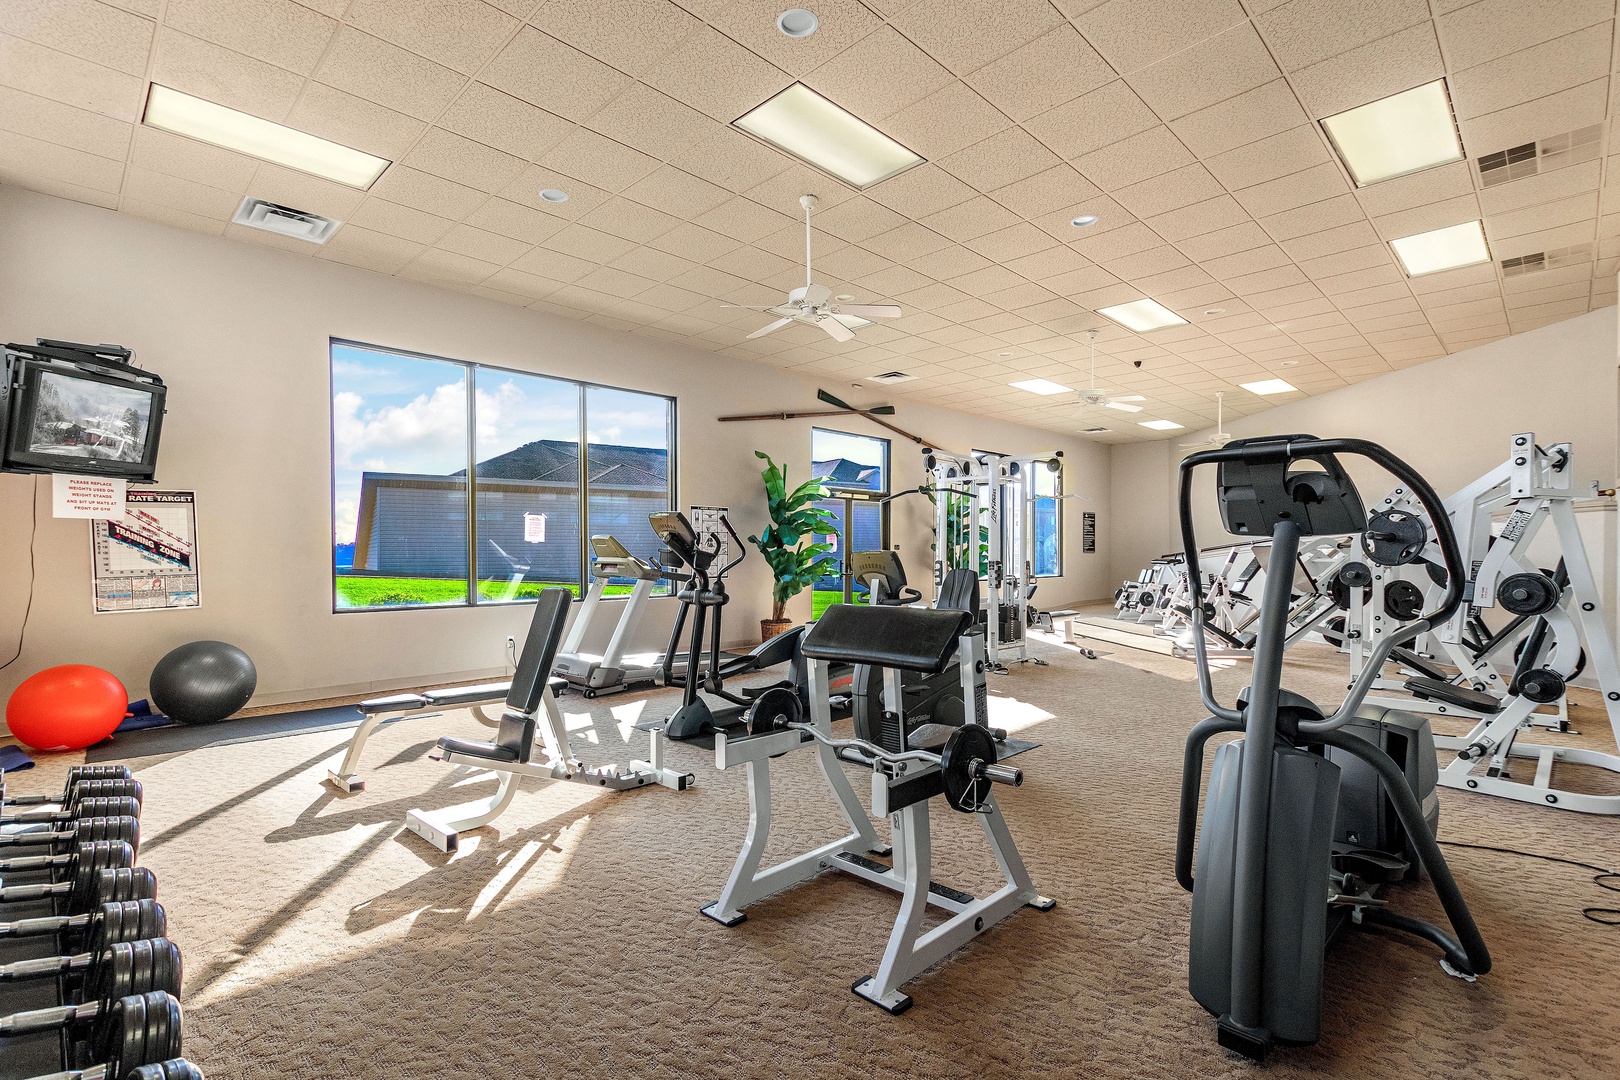 Gym amenities are available for your stay